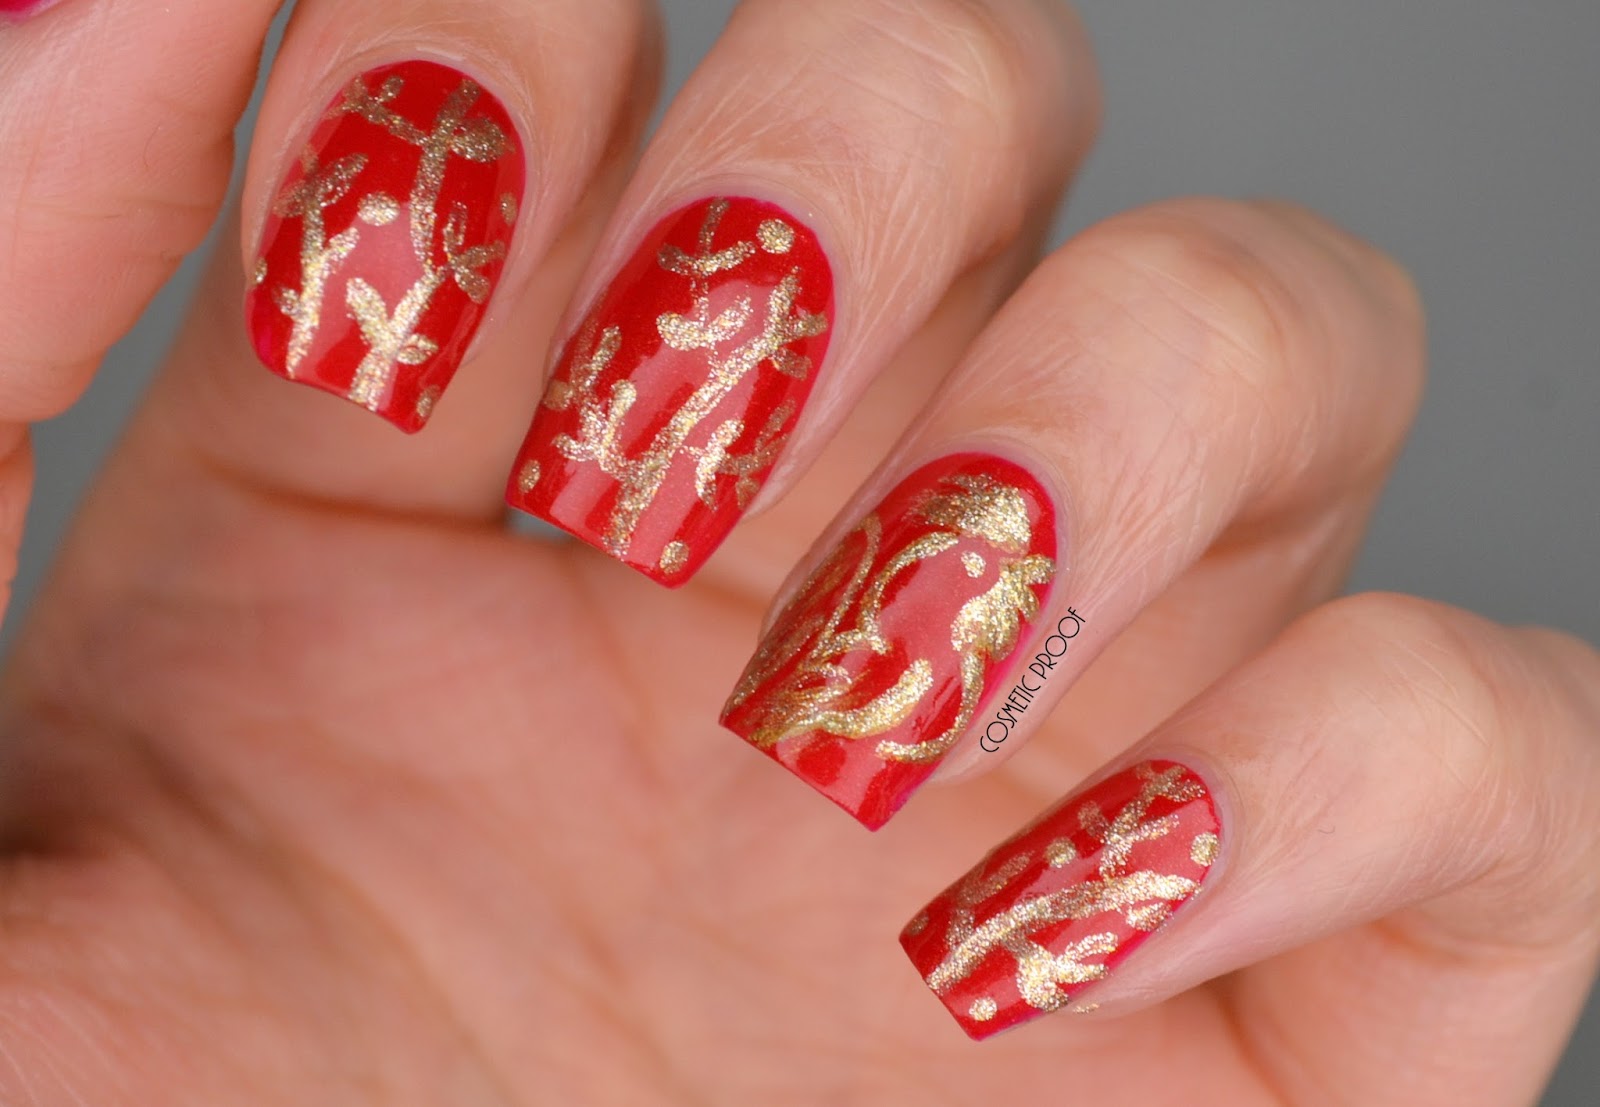 Lunar New Year Nails - wide 5